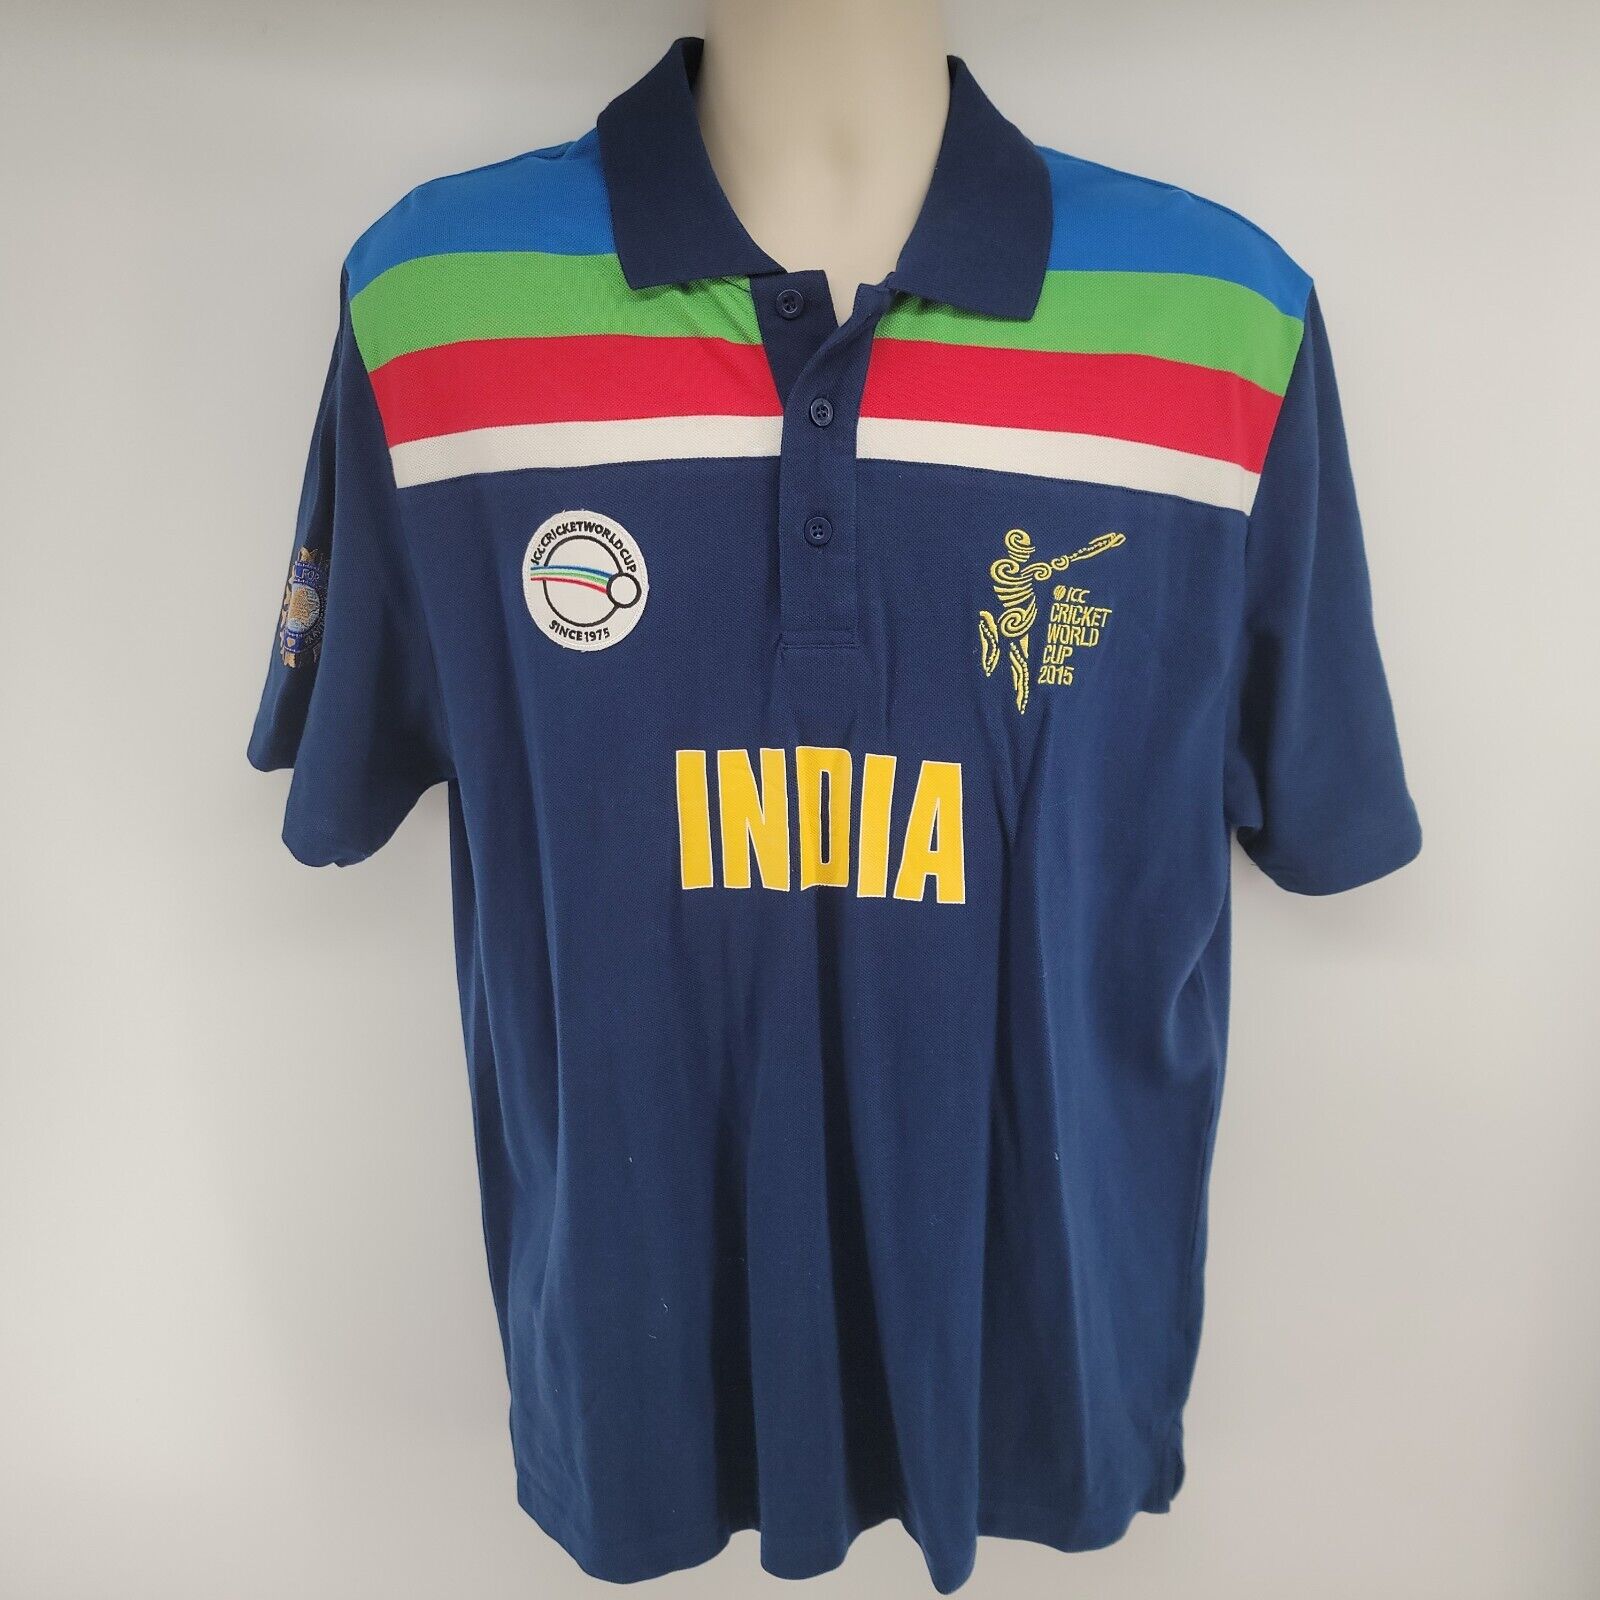 ICC Cricket World Cup 2015 India Jersey Polo Shirt Mens 2XL ICC Cricket World Cup CWC12398 - фотография #5